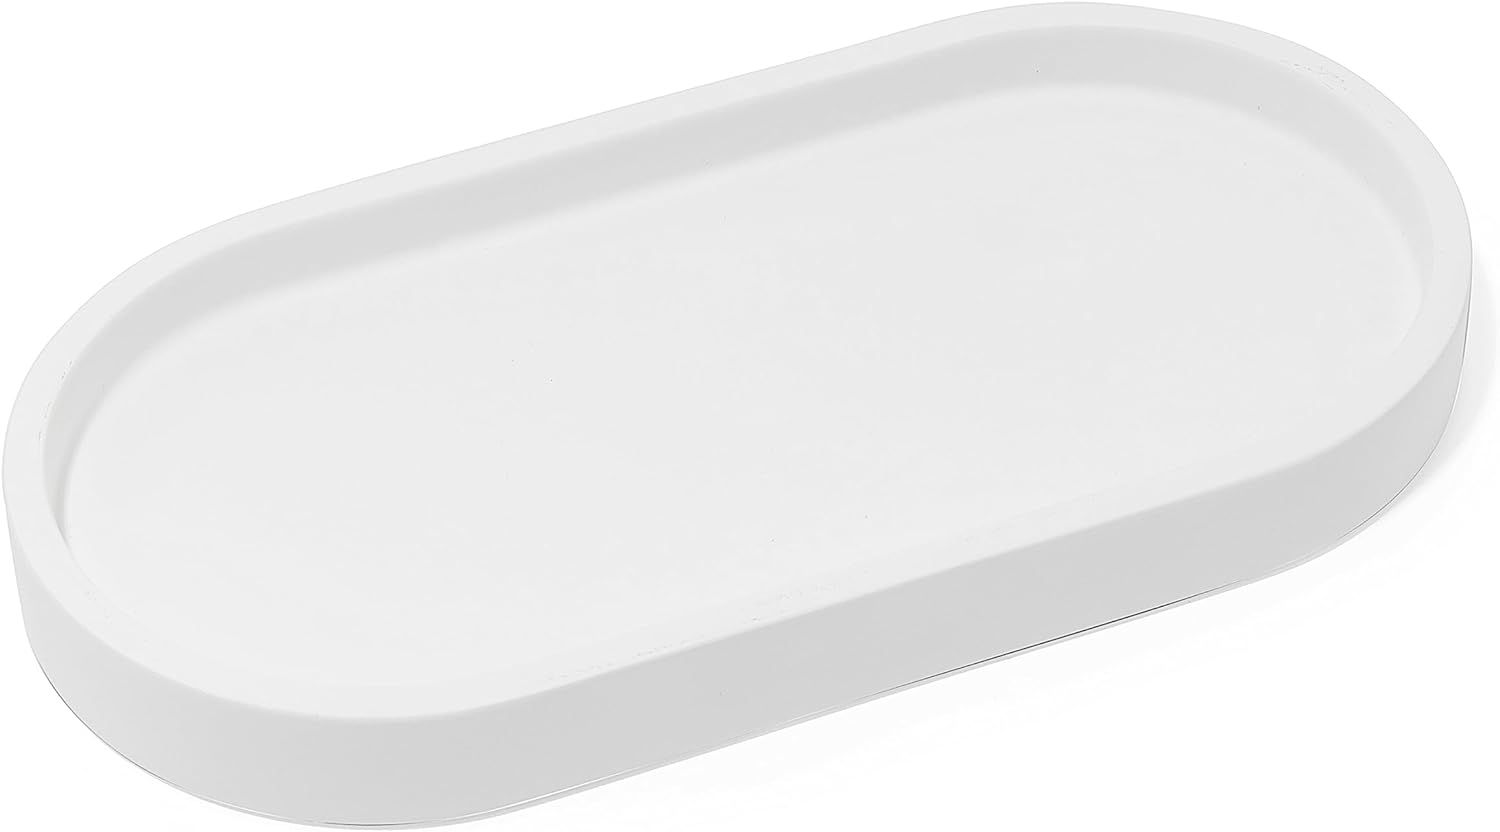 Yew Design - Matte White Round Soap Dispenser Tray for Bathrooms and Kitchens - Holds 2 Soap Disp... | Amazon (US)